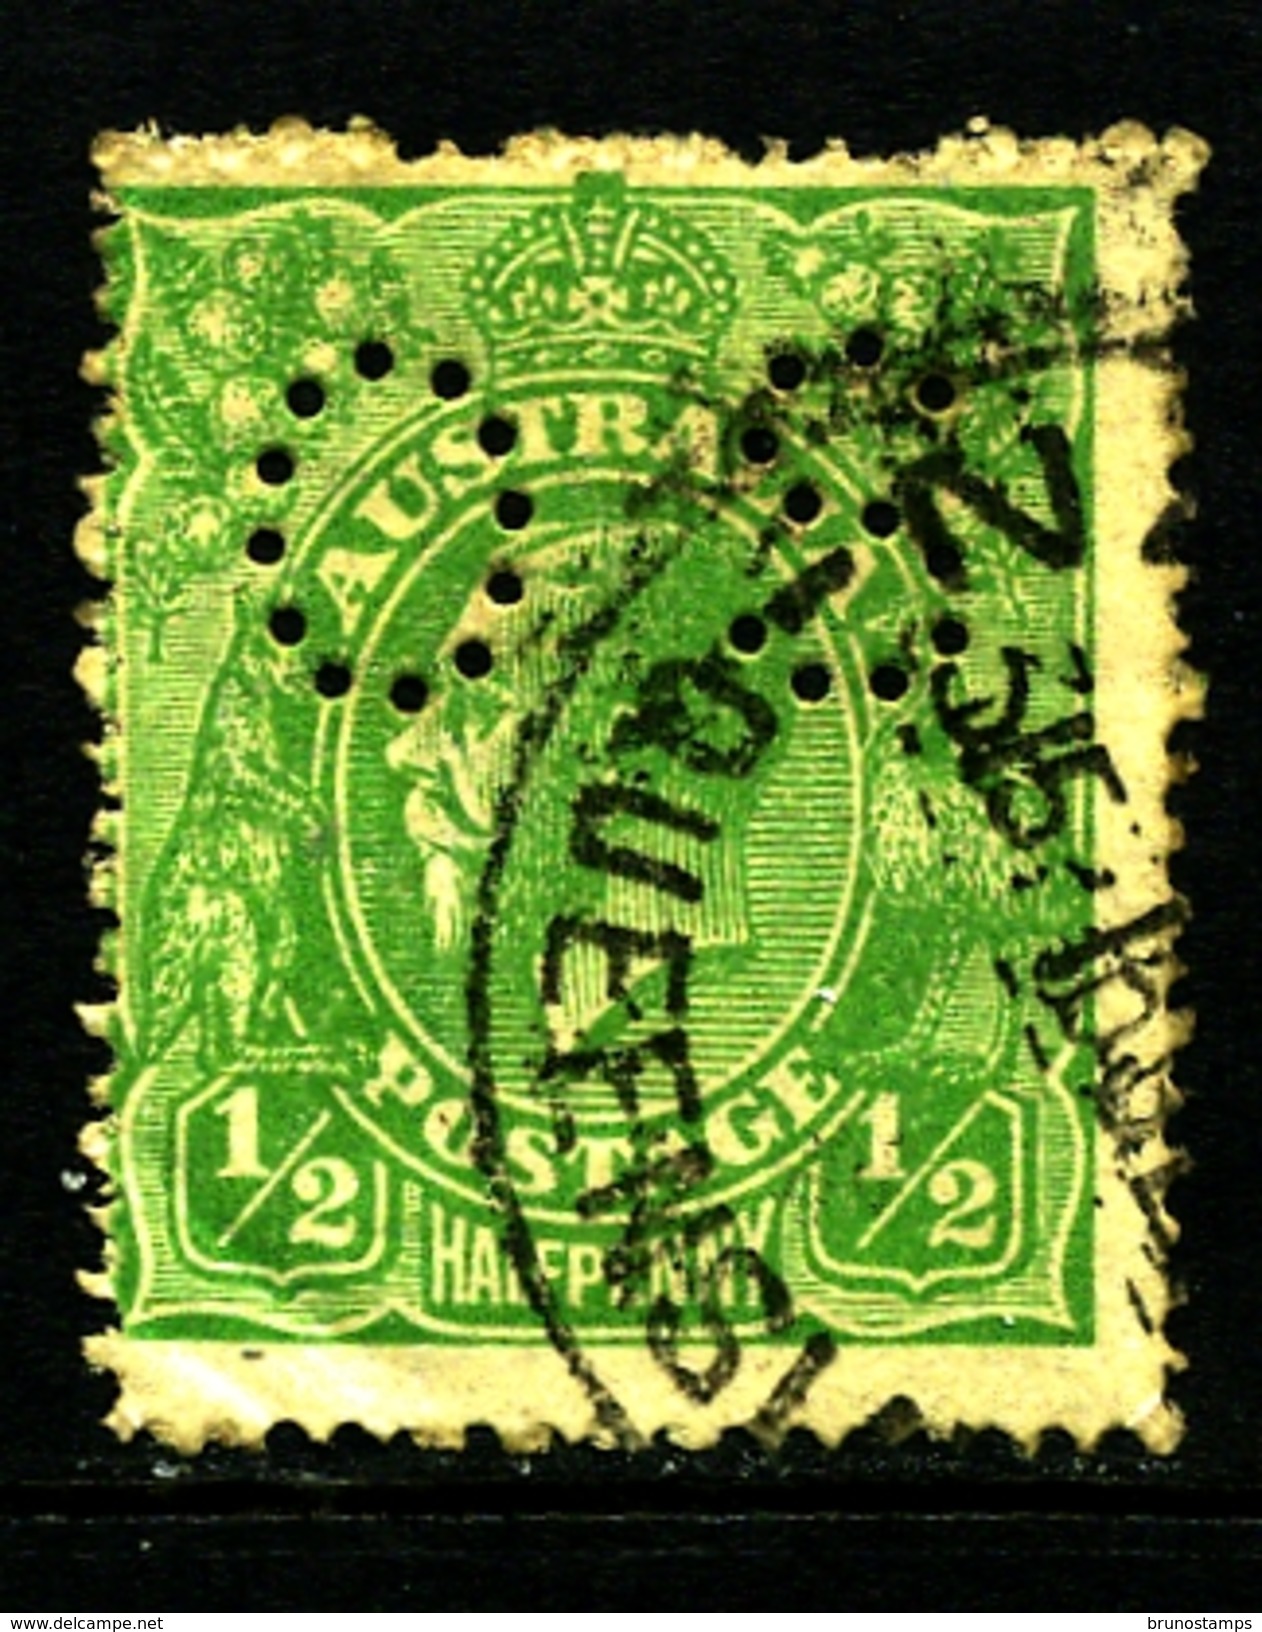 AUSTRALIA - 1918  KGV HEAD  1/2 D GREEN LARGE MULTIPLE WMK PERFORATED OS FINE USED  SG O61 - Used Stamps